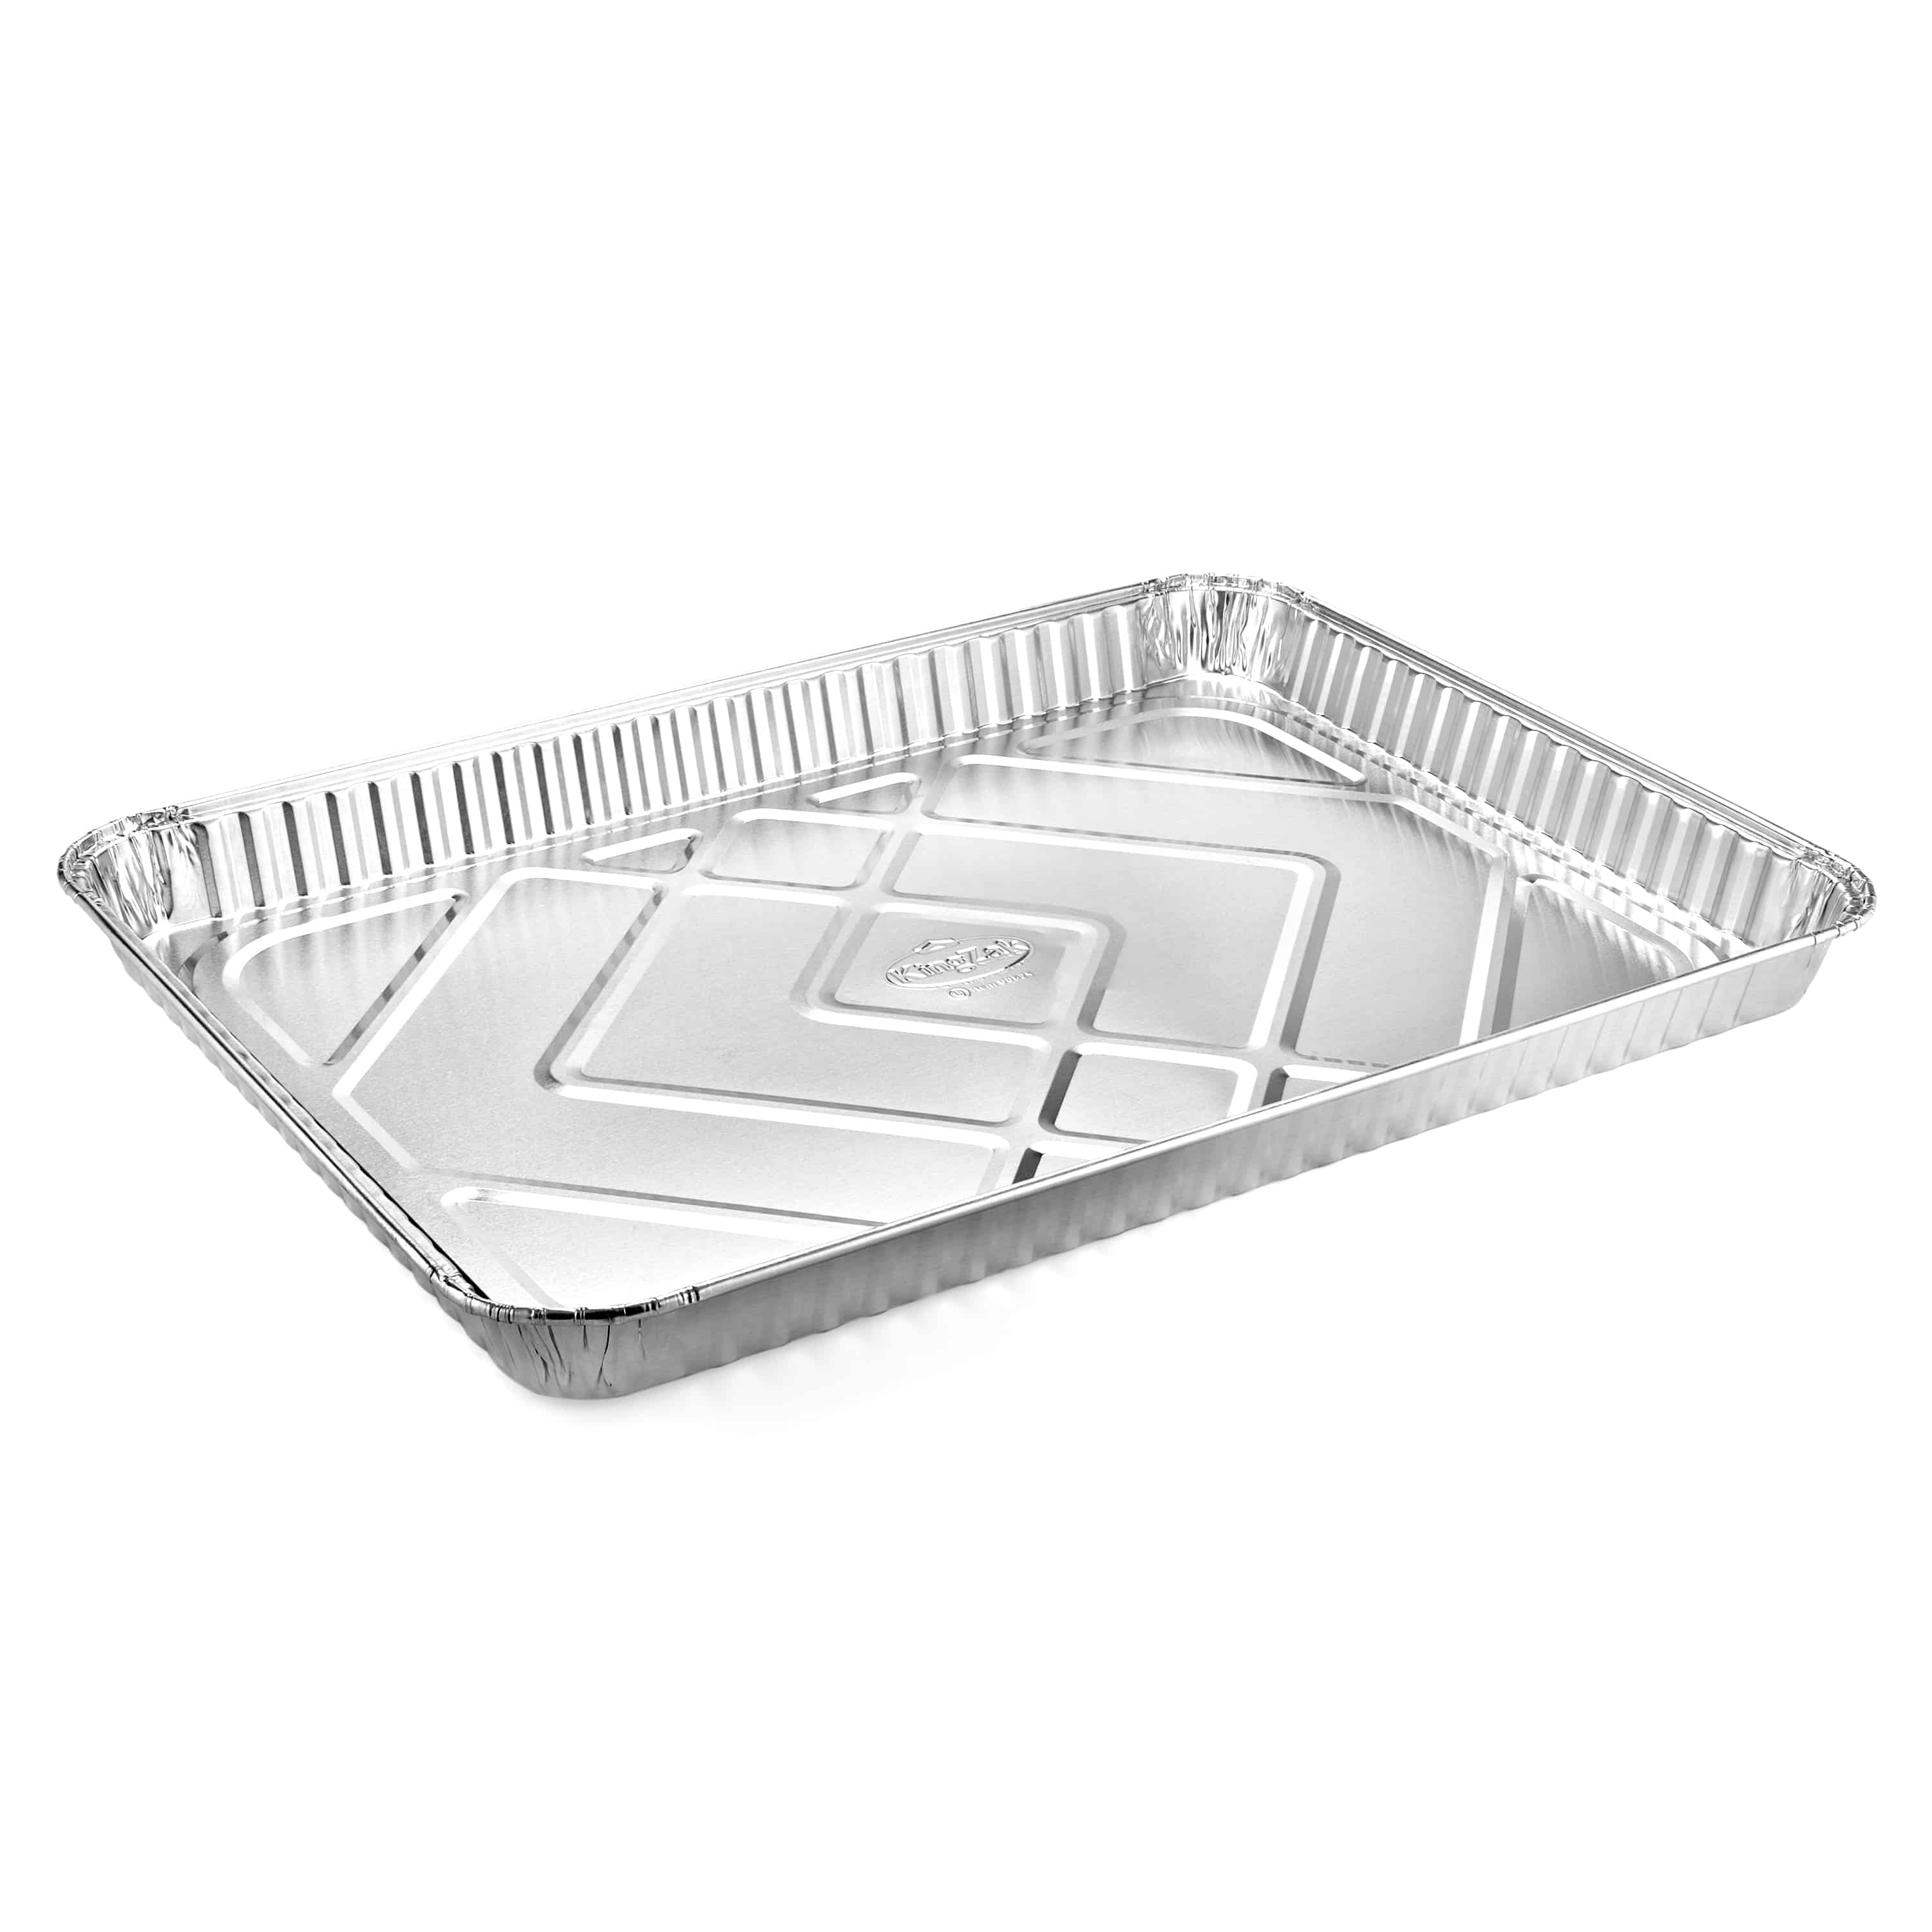 Nicole Home Collection Aluminum Pans Half Size Cookie Sheet 15 Count | Durable Nonstick Baking Sheets 17.75 x 12.75